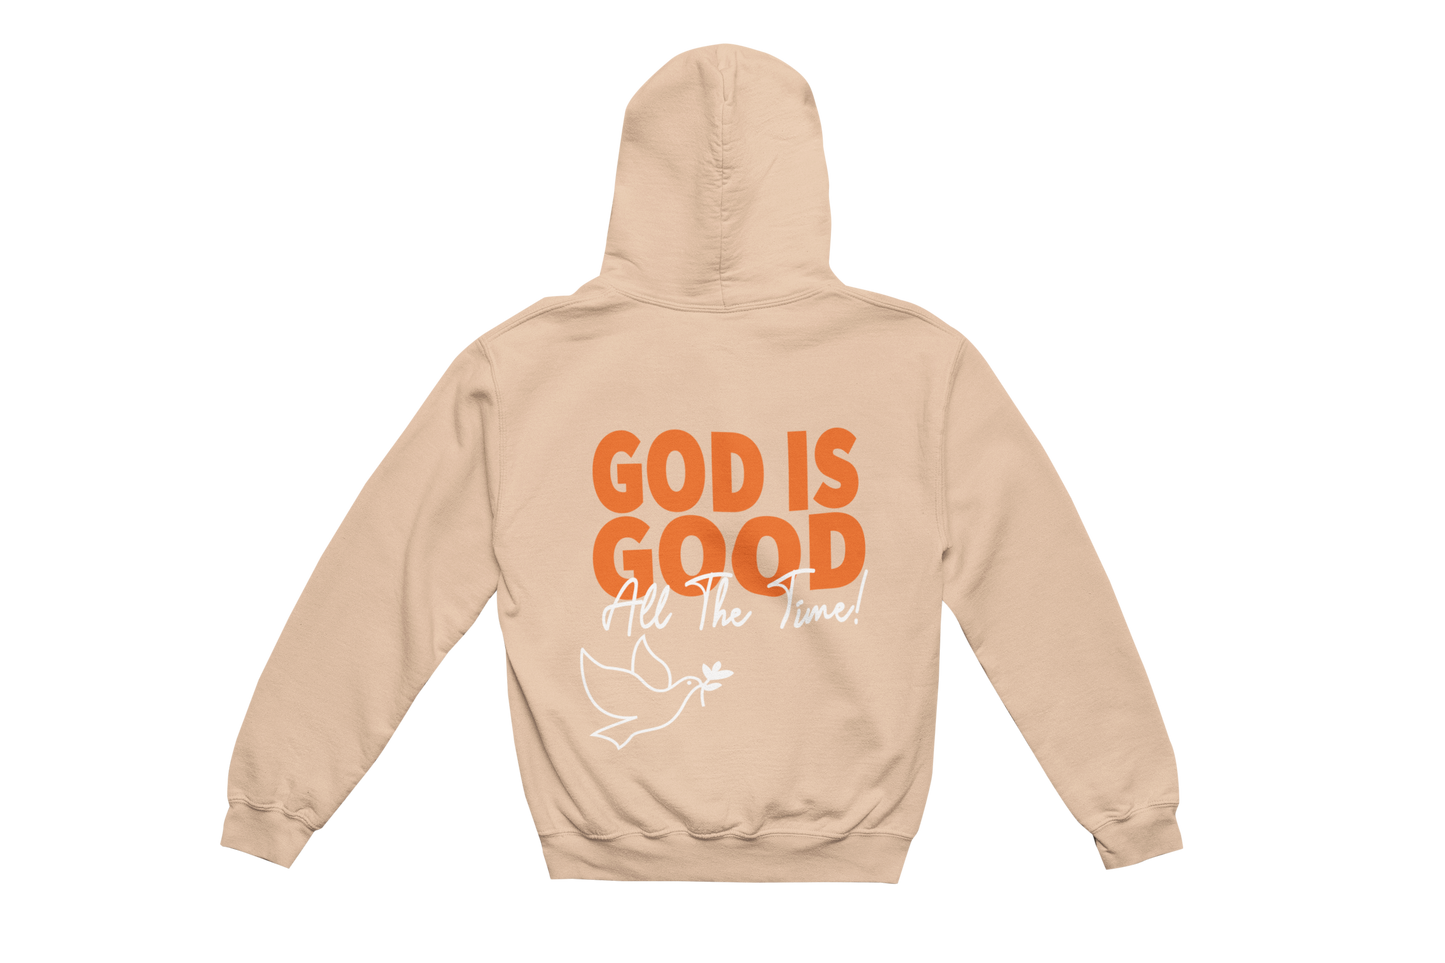 God is Good All the The Time/White, Orange/ Sand Cream Hoodie Joggers Set